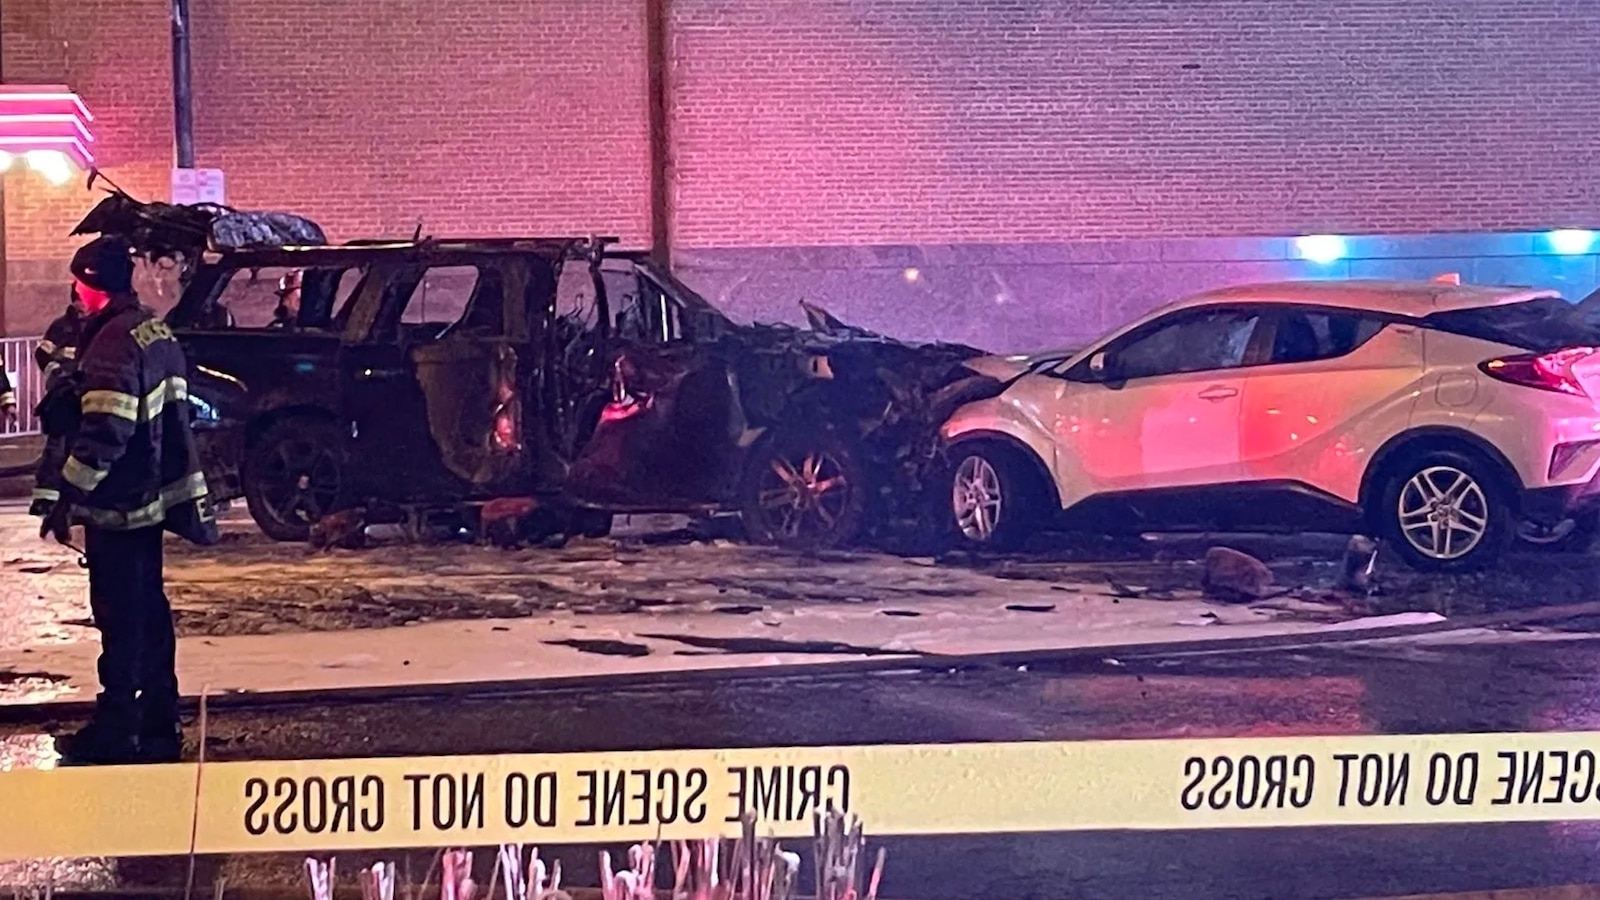 3rd victim dies in fiery New Year's car attack near concert venue